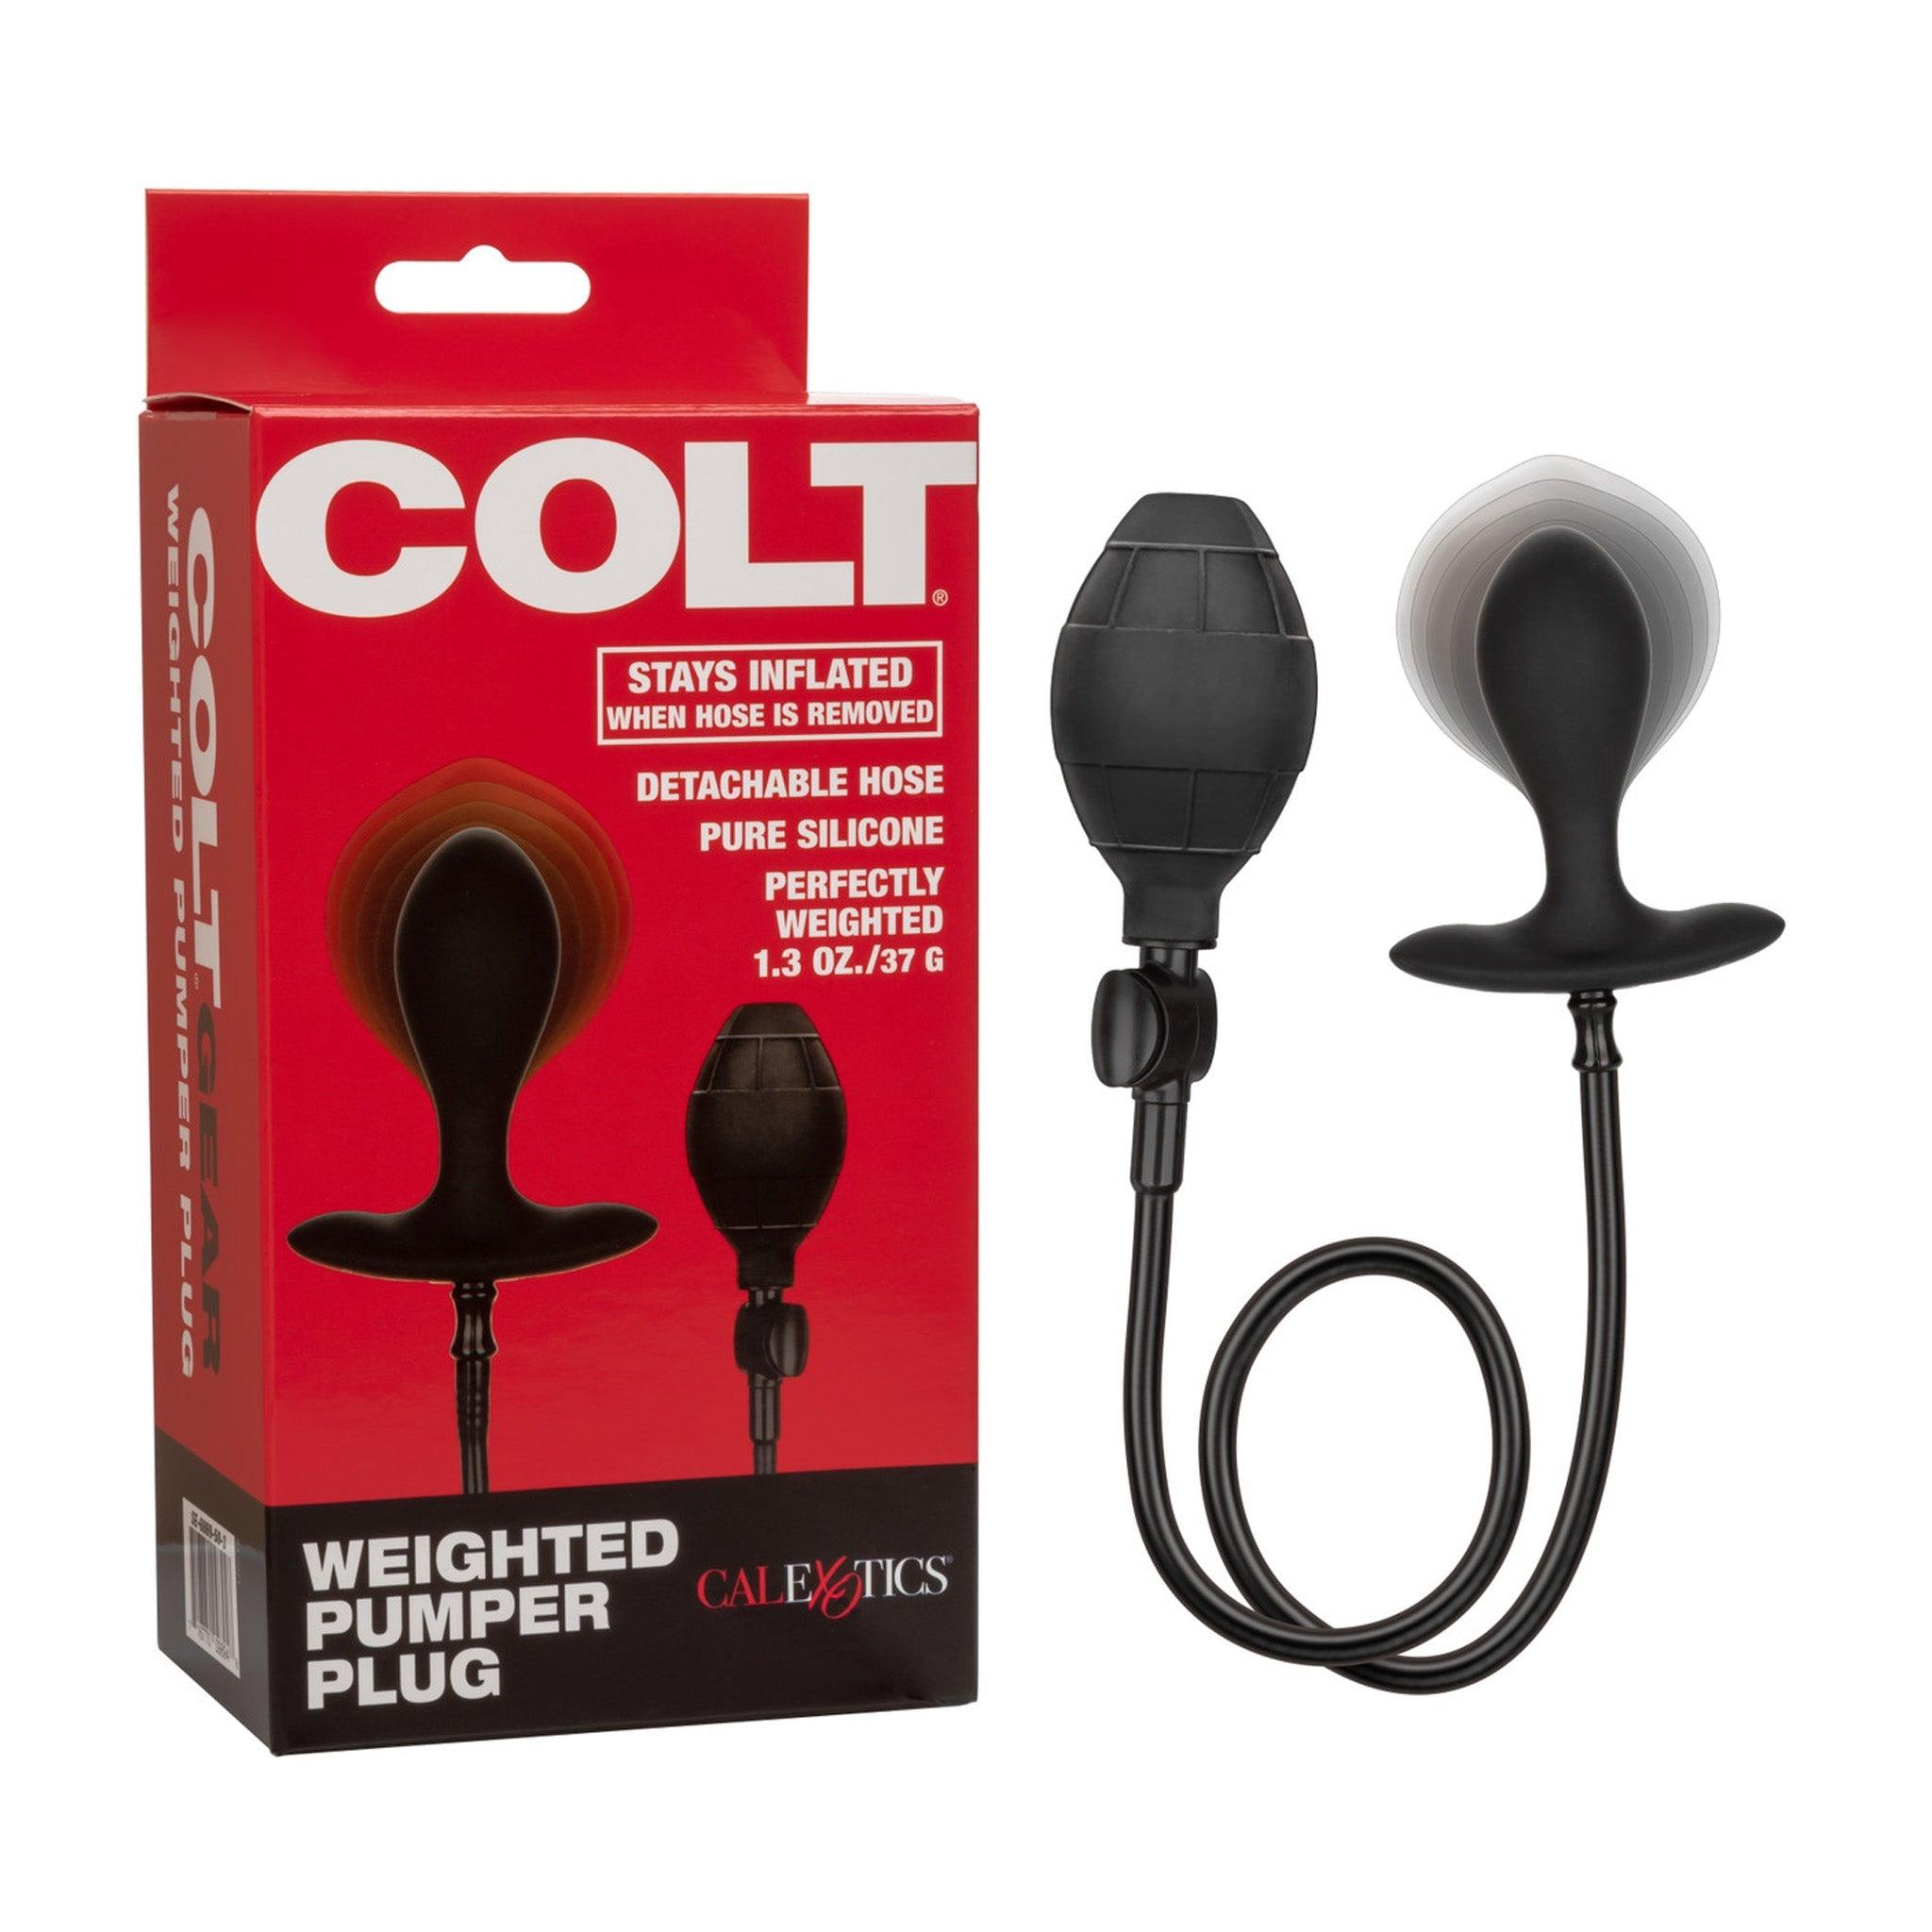 COLT Inflatable Weighted Pumper Plug - CheapLubes.com